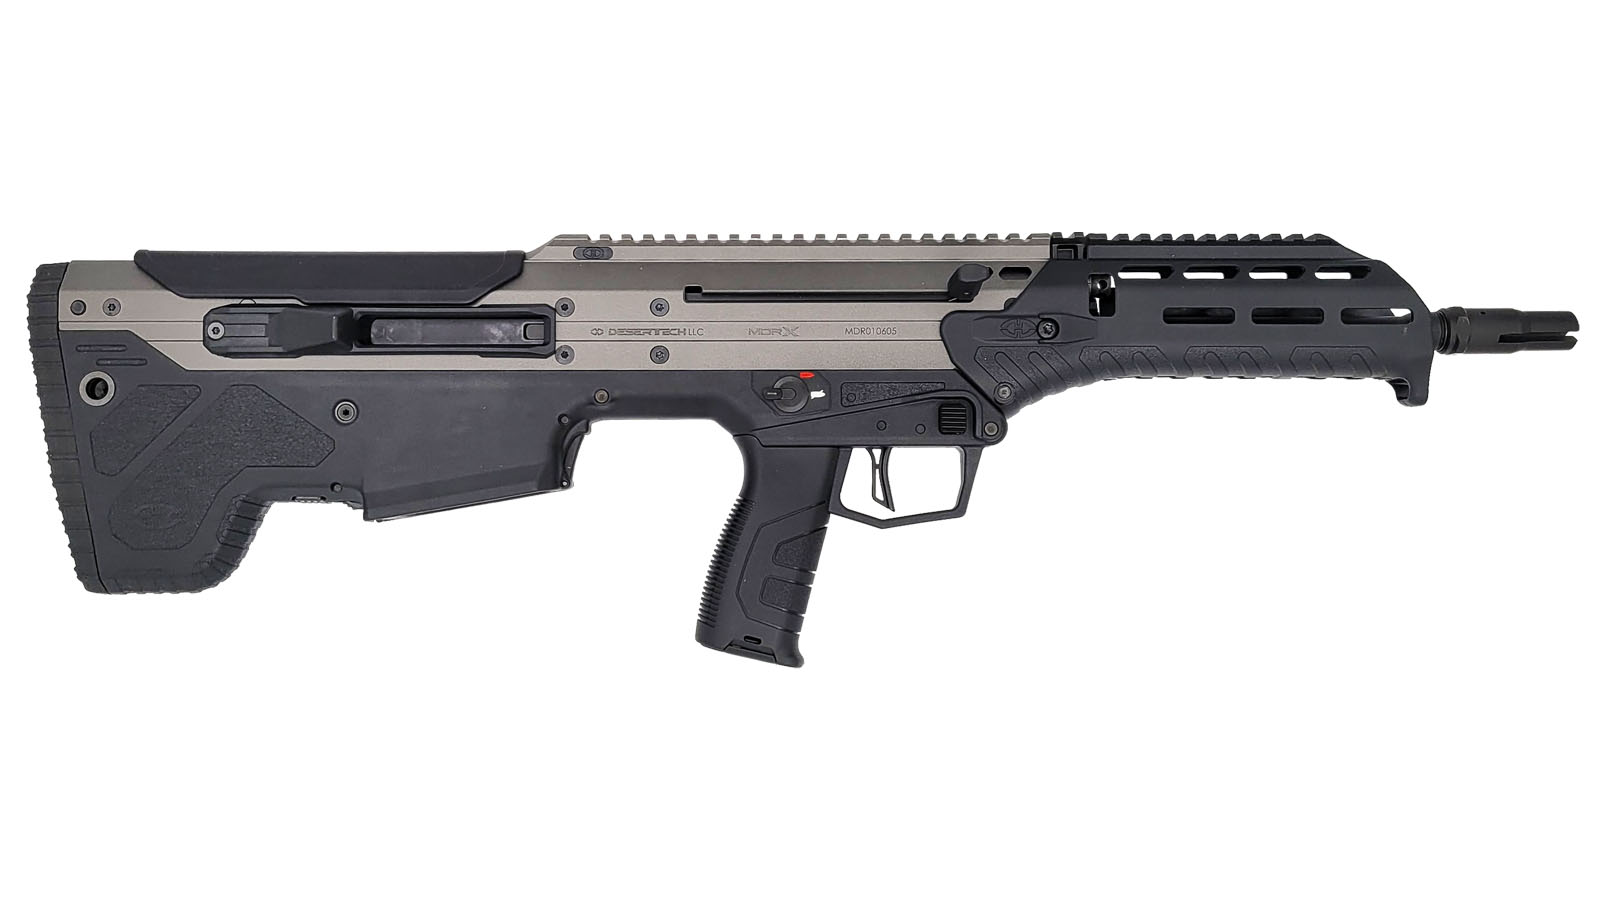 MDRx Rifle, 556NATO 223Rem 16" 10rd Side-Ejection Tungsten